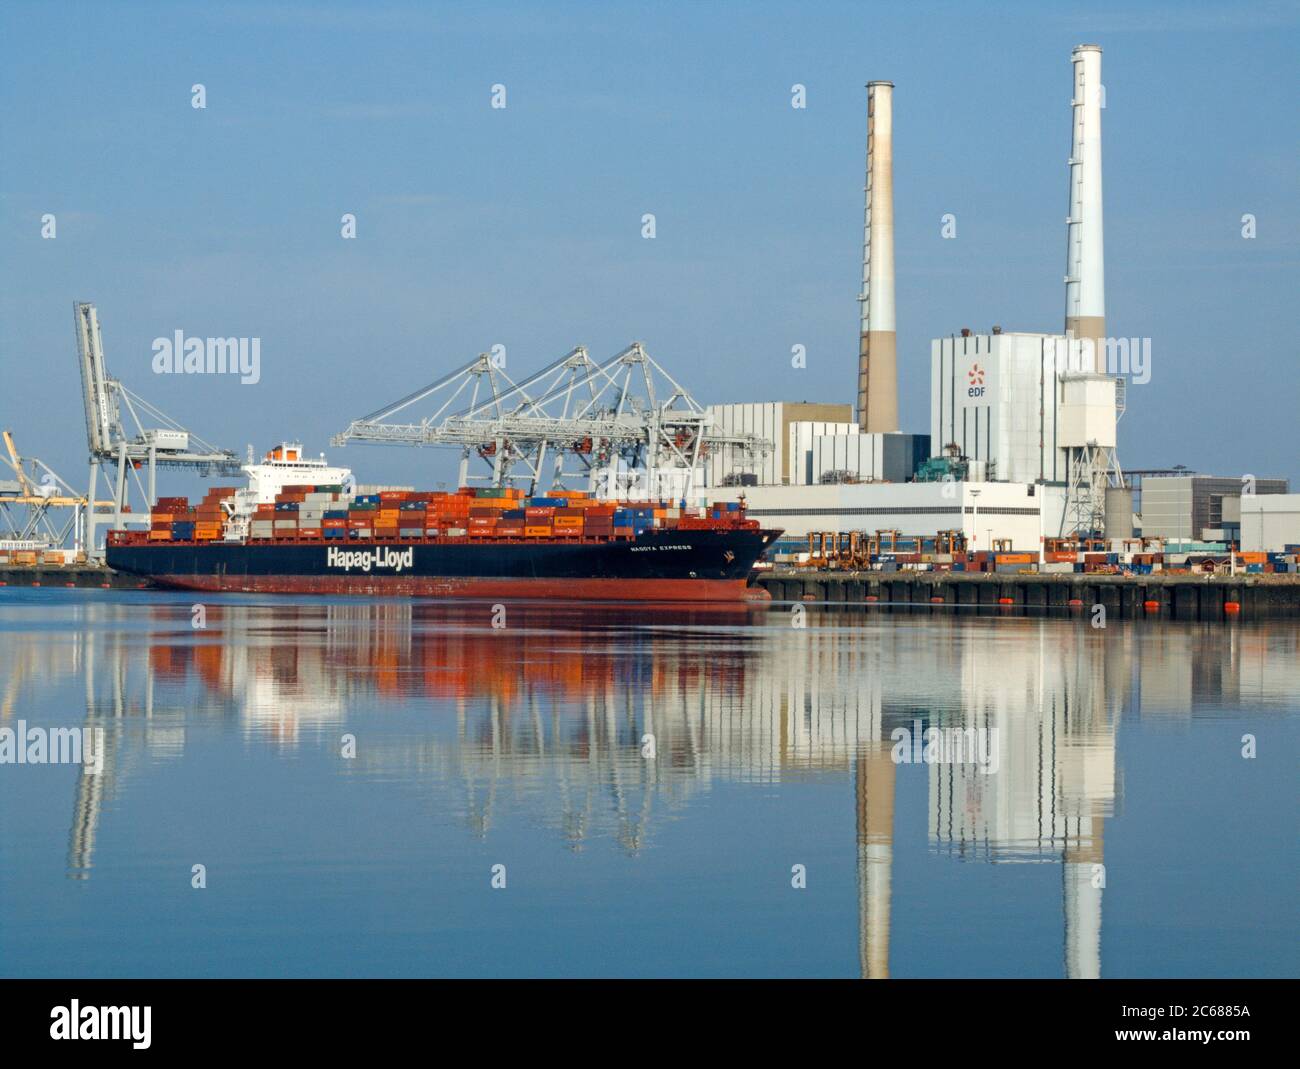 Nave containers Reflecting in Water, le Havre, Francia Foto Stock